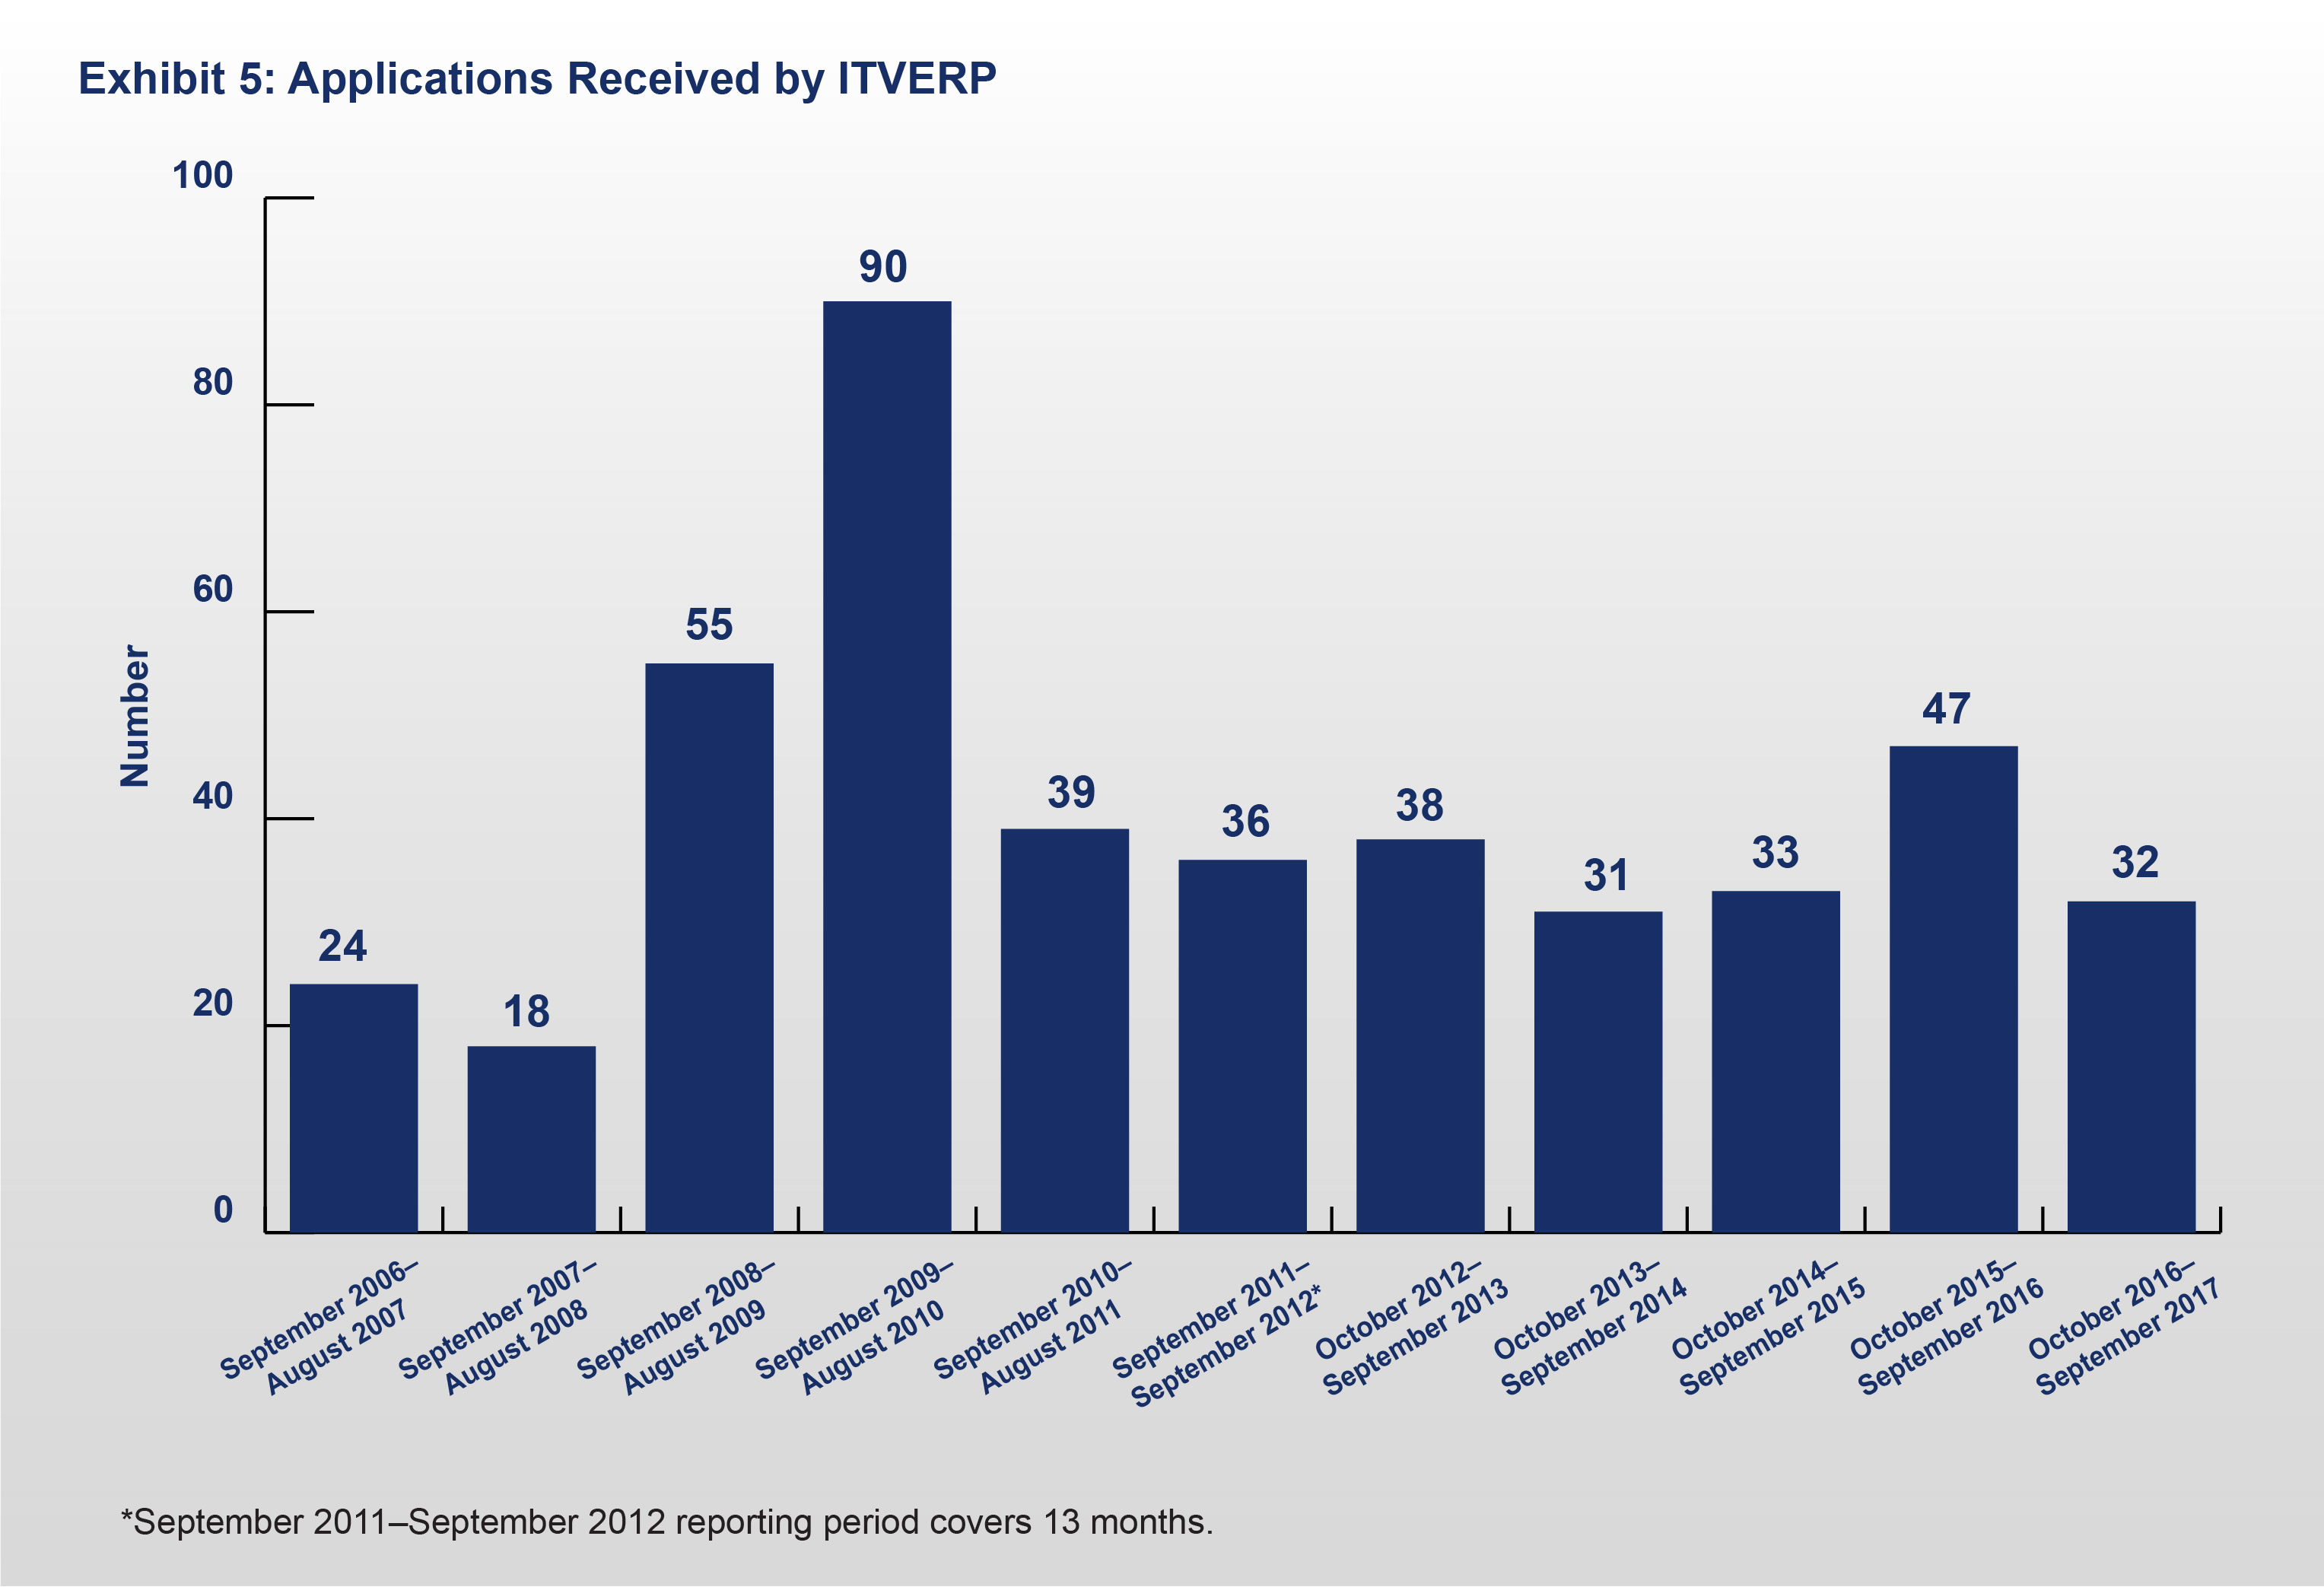 Exhibit 5: Applications Received by ITVERP (As of September 2017)